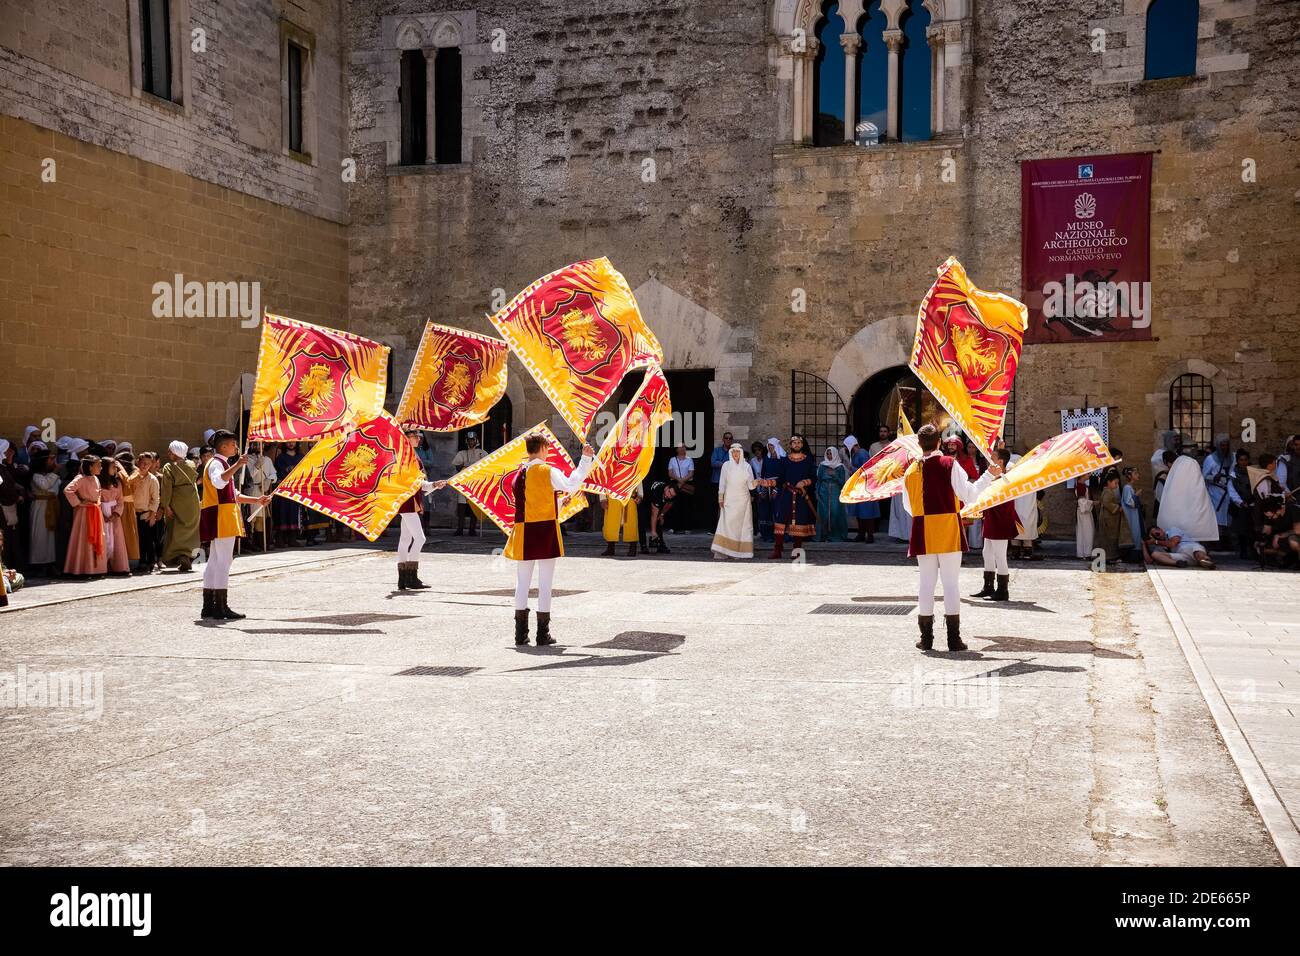 GIOIA DEL COLLE, ITALY - AUGUST 4, 2019: Flag throwers making a performance during the medieval reenactment 'Palio delle botti' Stock Photo